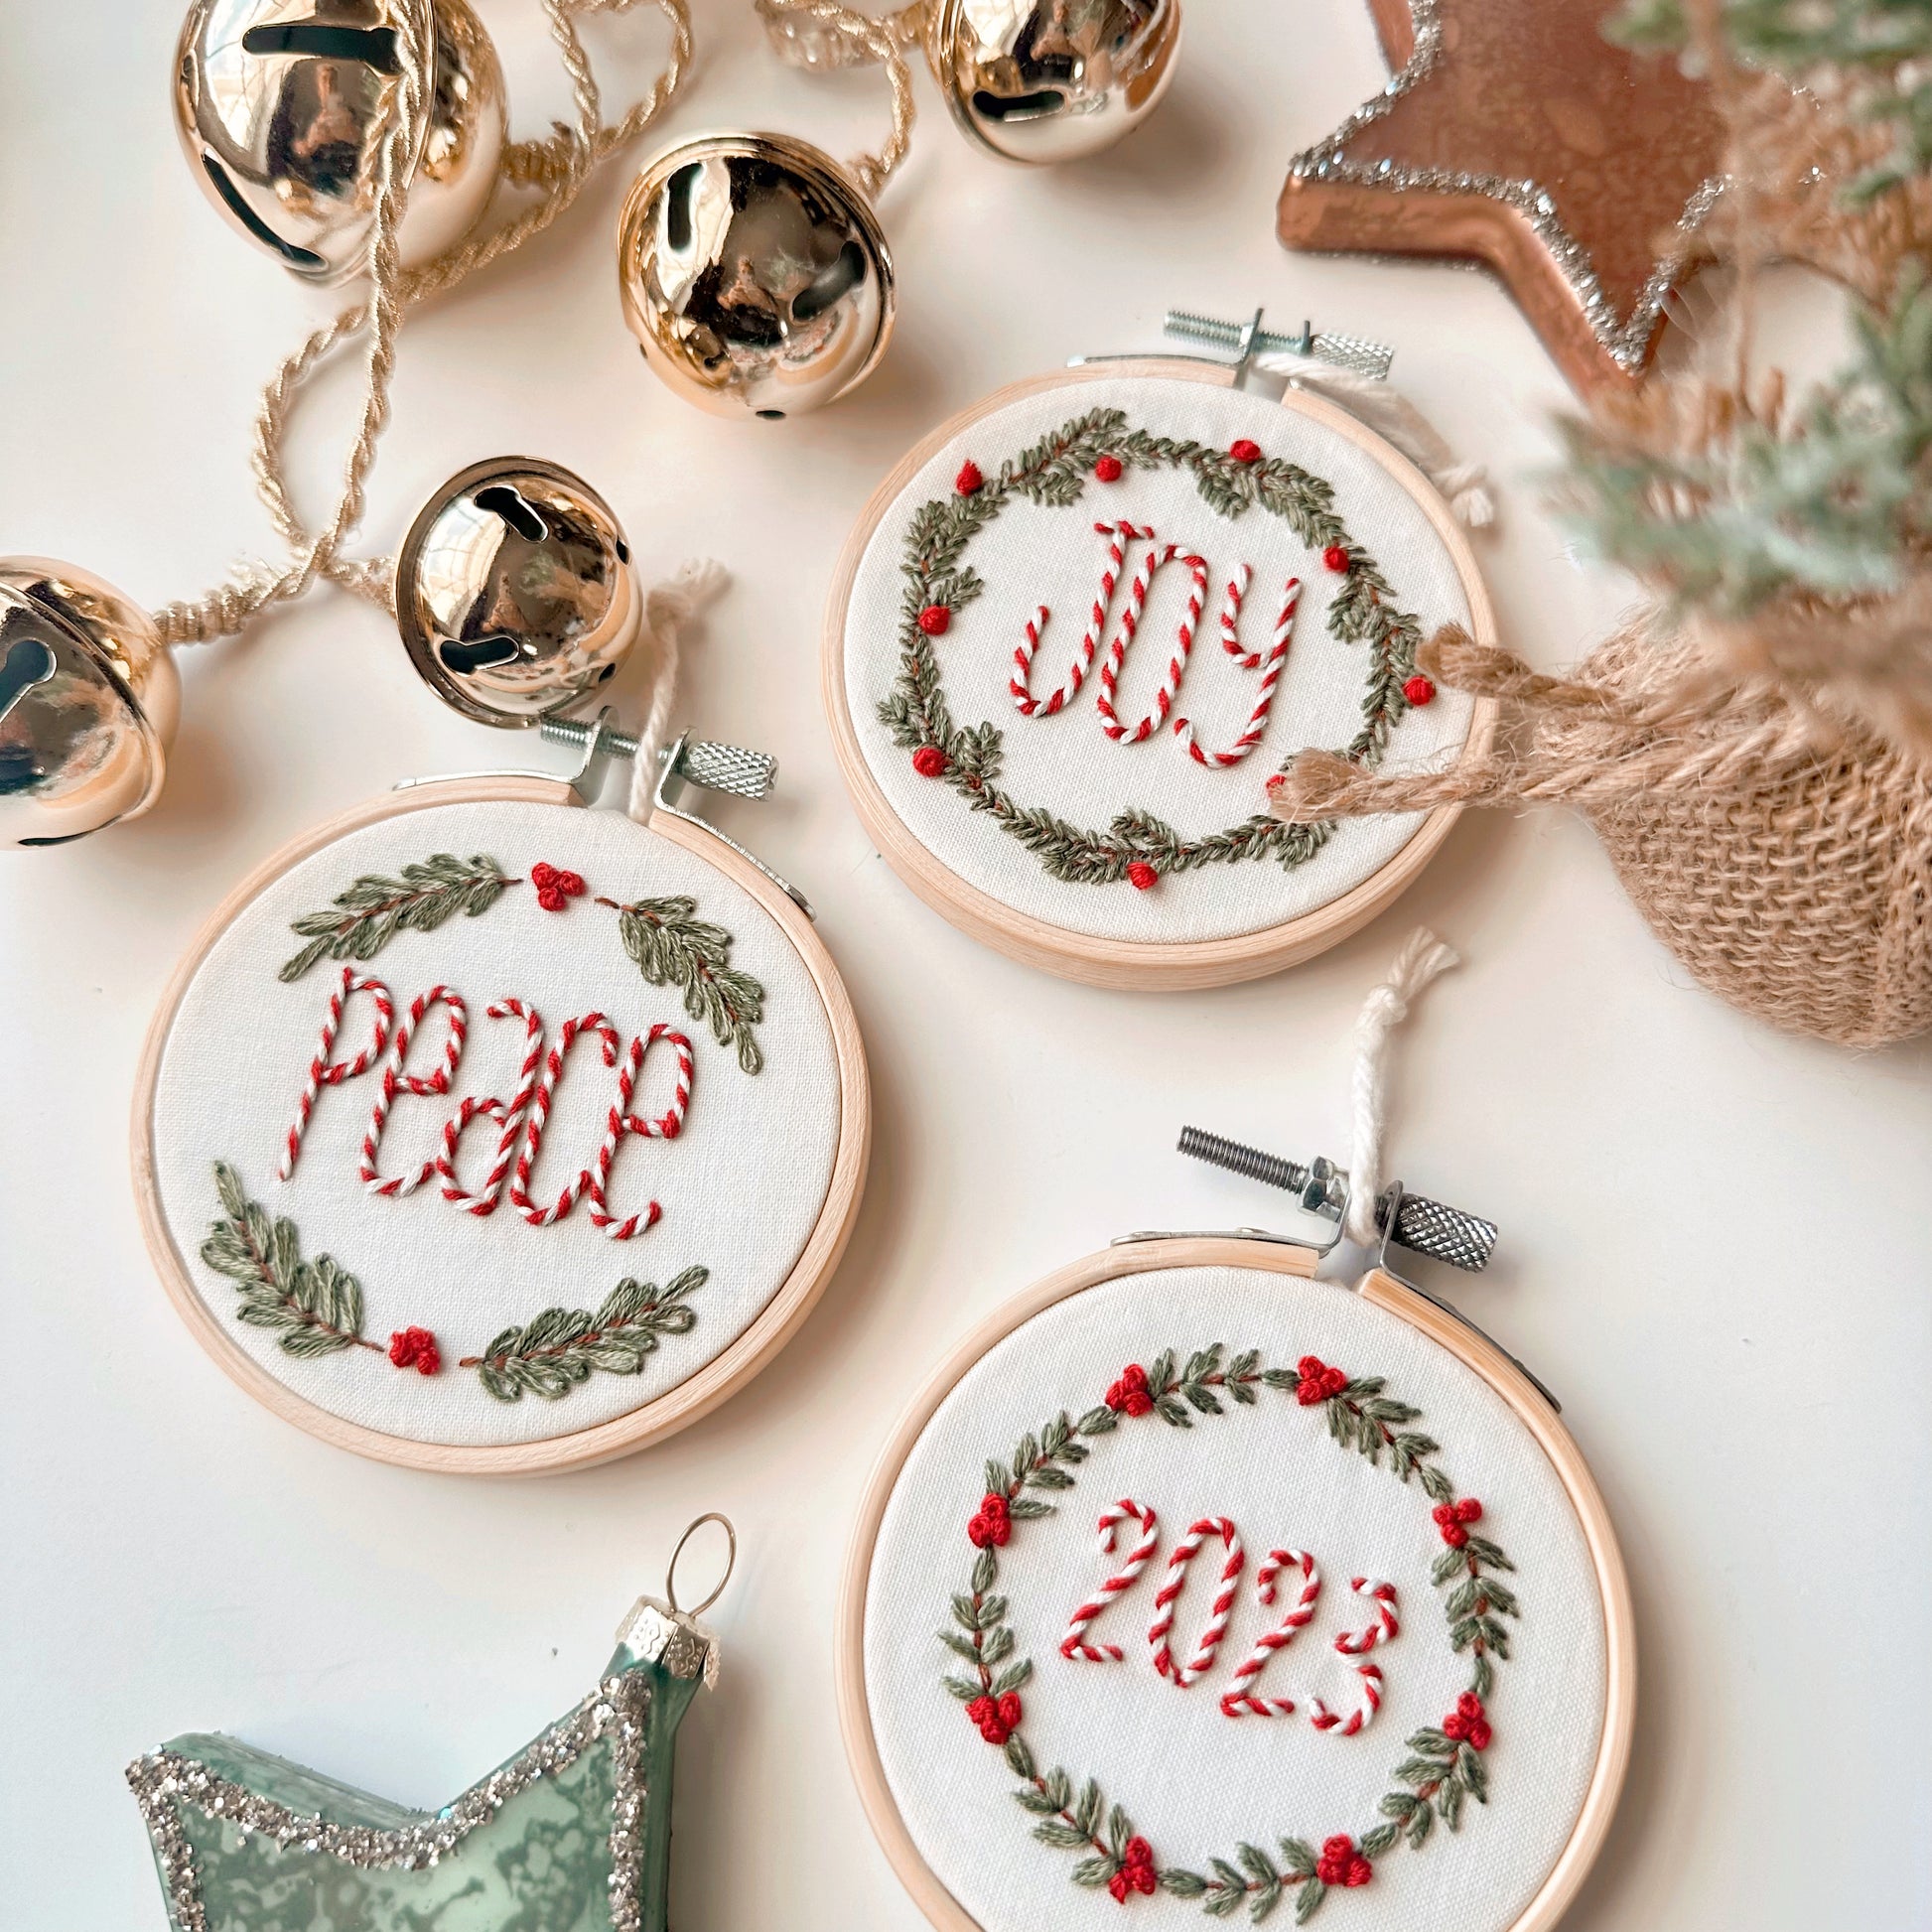 Embroidery Kit Christmas Ornaments Leaf Wreath Awesocrafts Full Range of  Embroidery Starter Kits for Beginners Adults Kids DIY Handmade Easy  Patterns